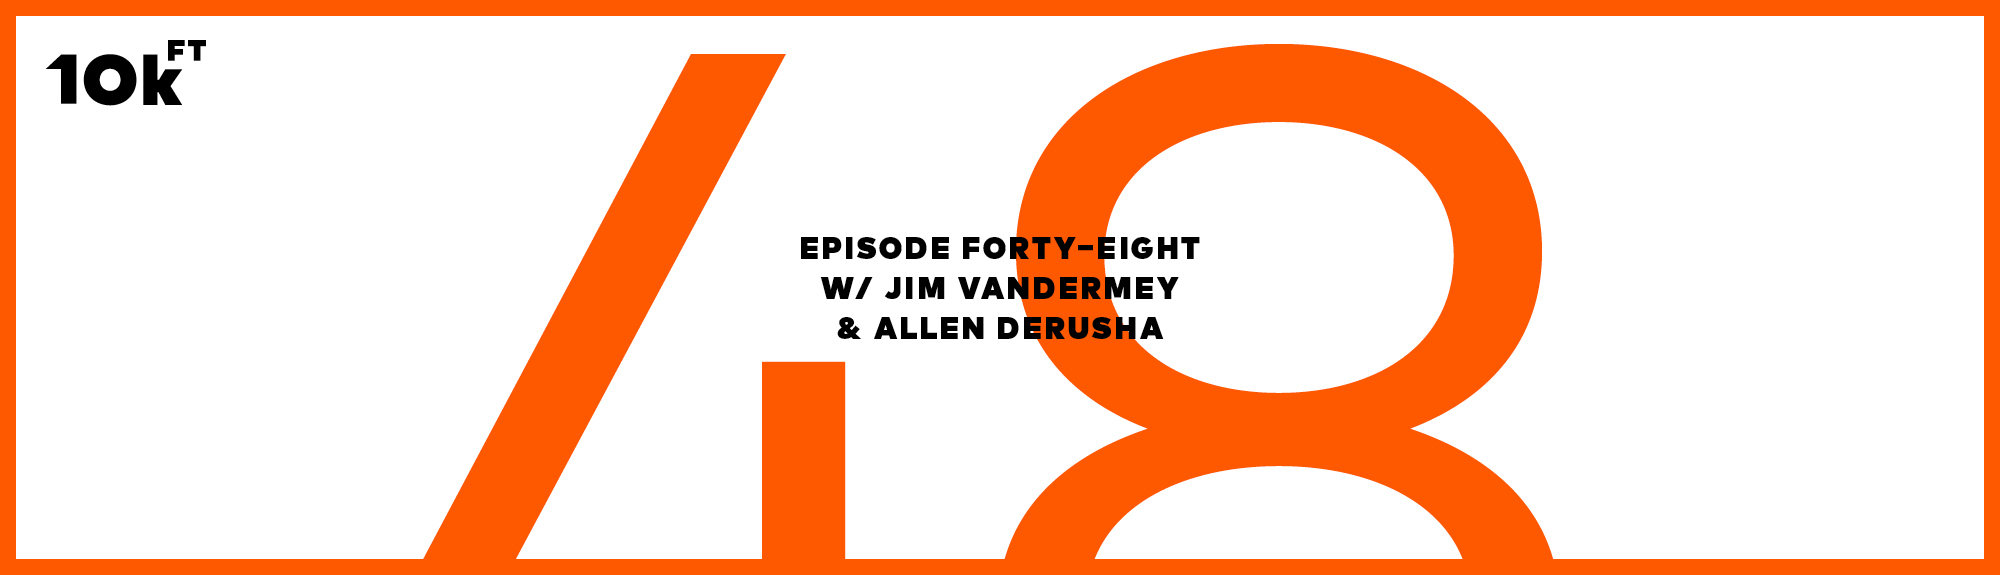 Orange rectangle with a white inside background. Top right corner has "10k ft" written. In the middle, the text reads "Episode Forty-Eight w/ Jim VanderMey & Allen Derusha". A large "48" is written in orange behind this middle text.